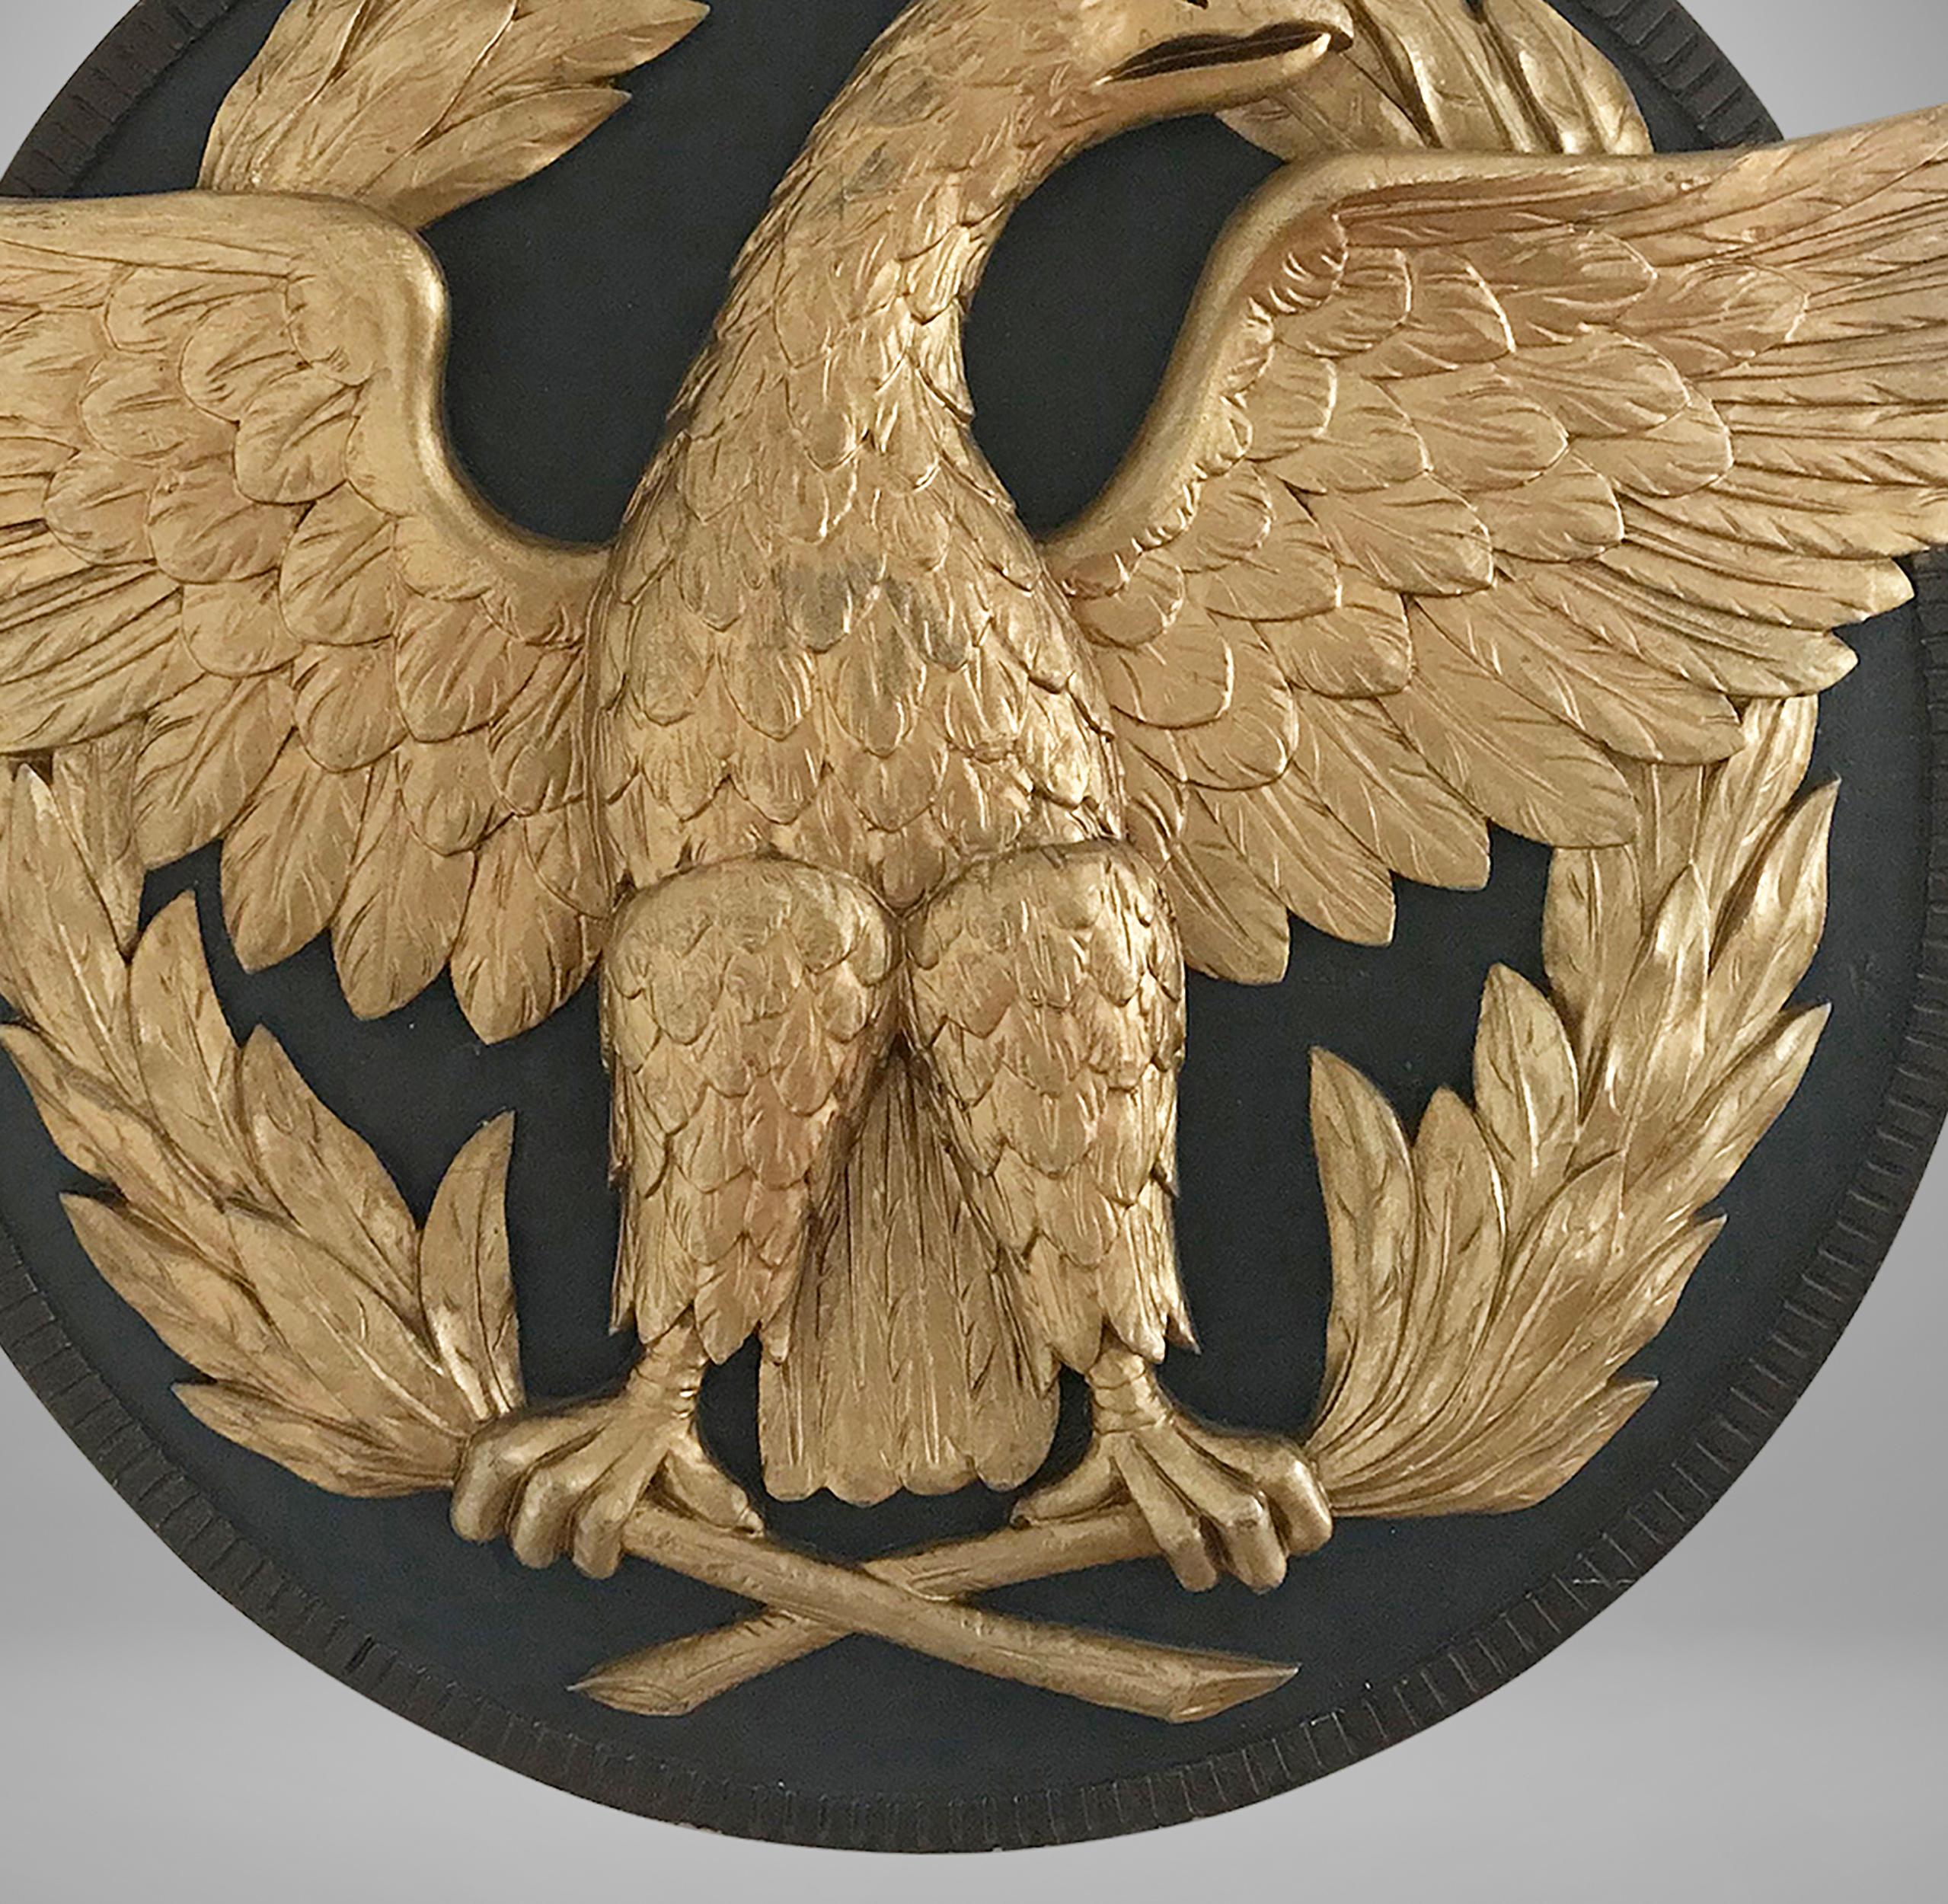 Unusual form and highly detailed that was masterfully carved in relief form in three sections, most likely used on a Government building. The eagle is clutching two long olive branches that go around the roundel up to the head. The roundel is